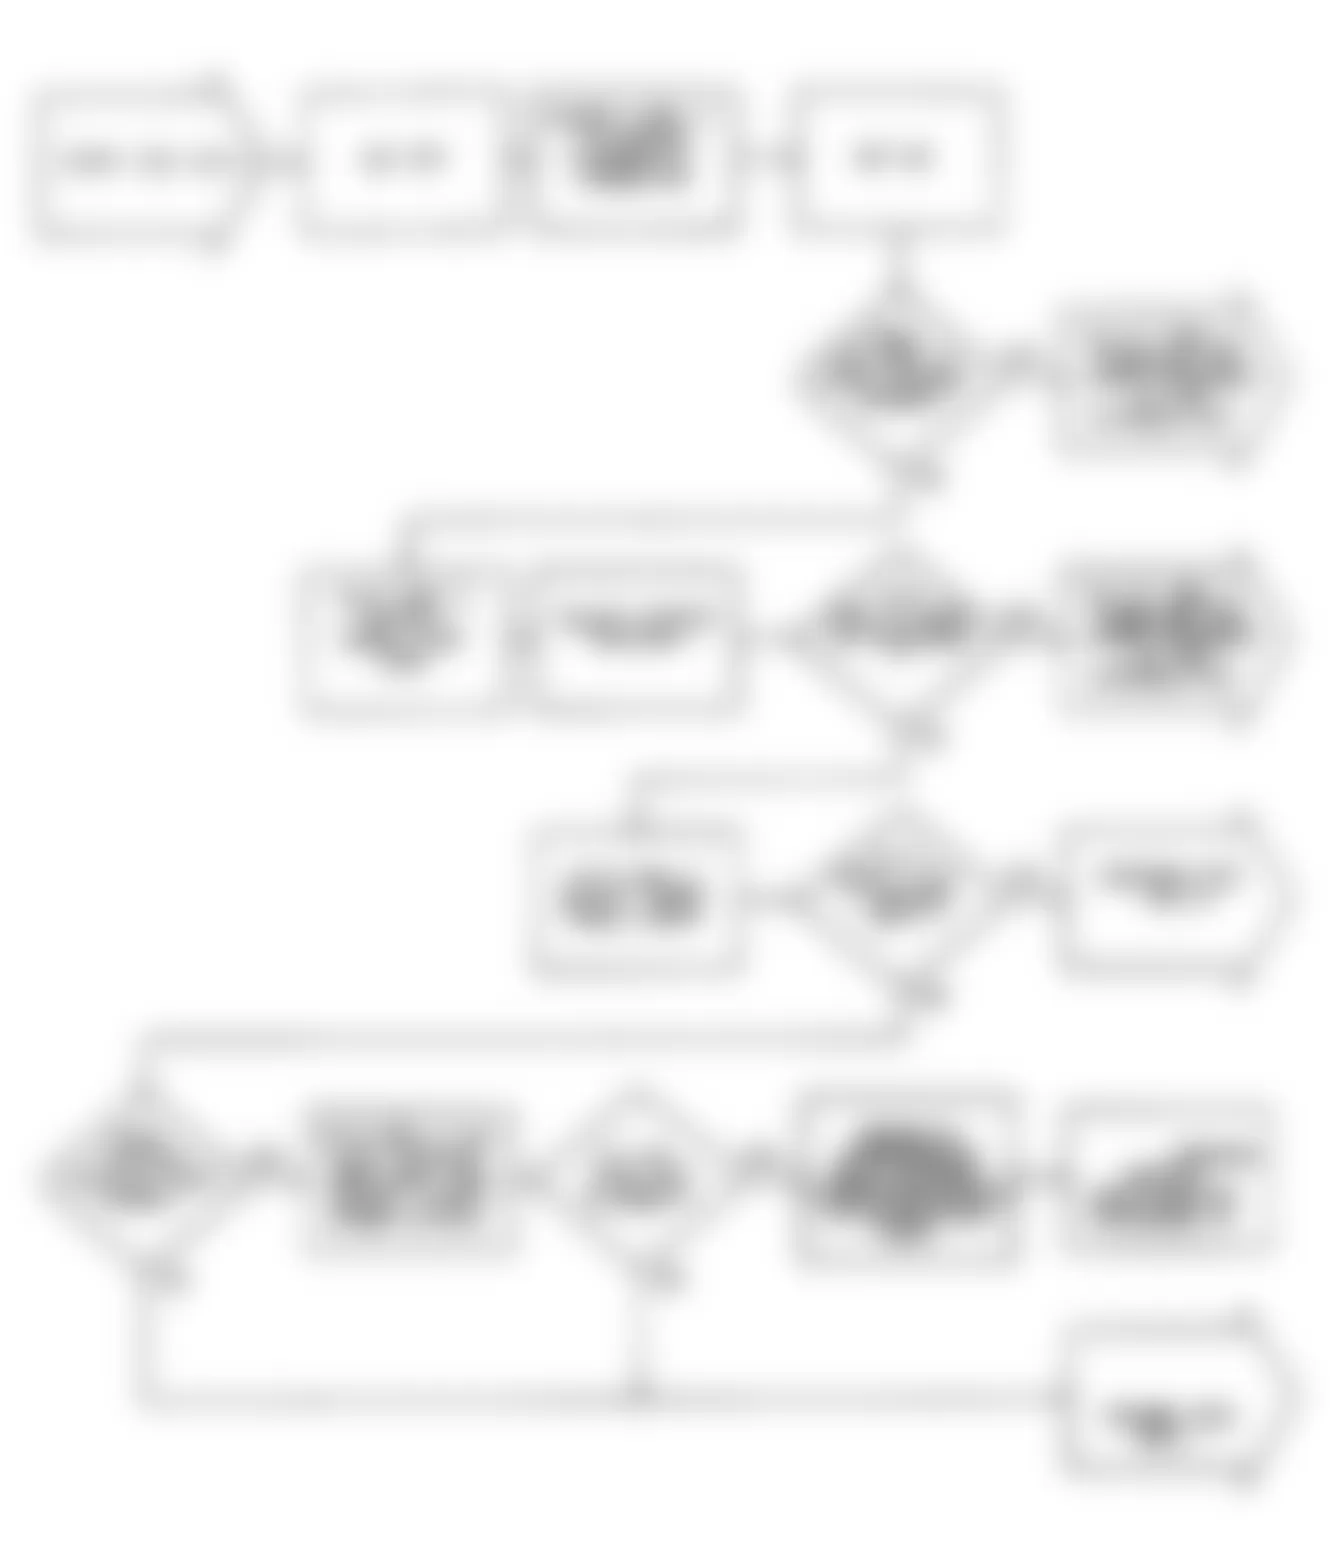 Dodge Daytona Shelby 1990 - Component Locations -  NS-3: Flow Chart